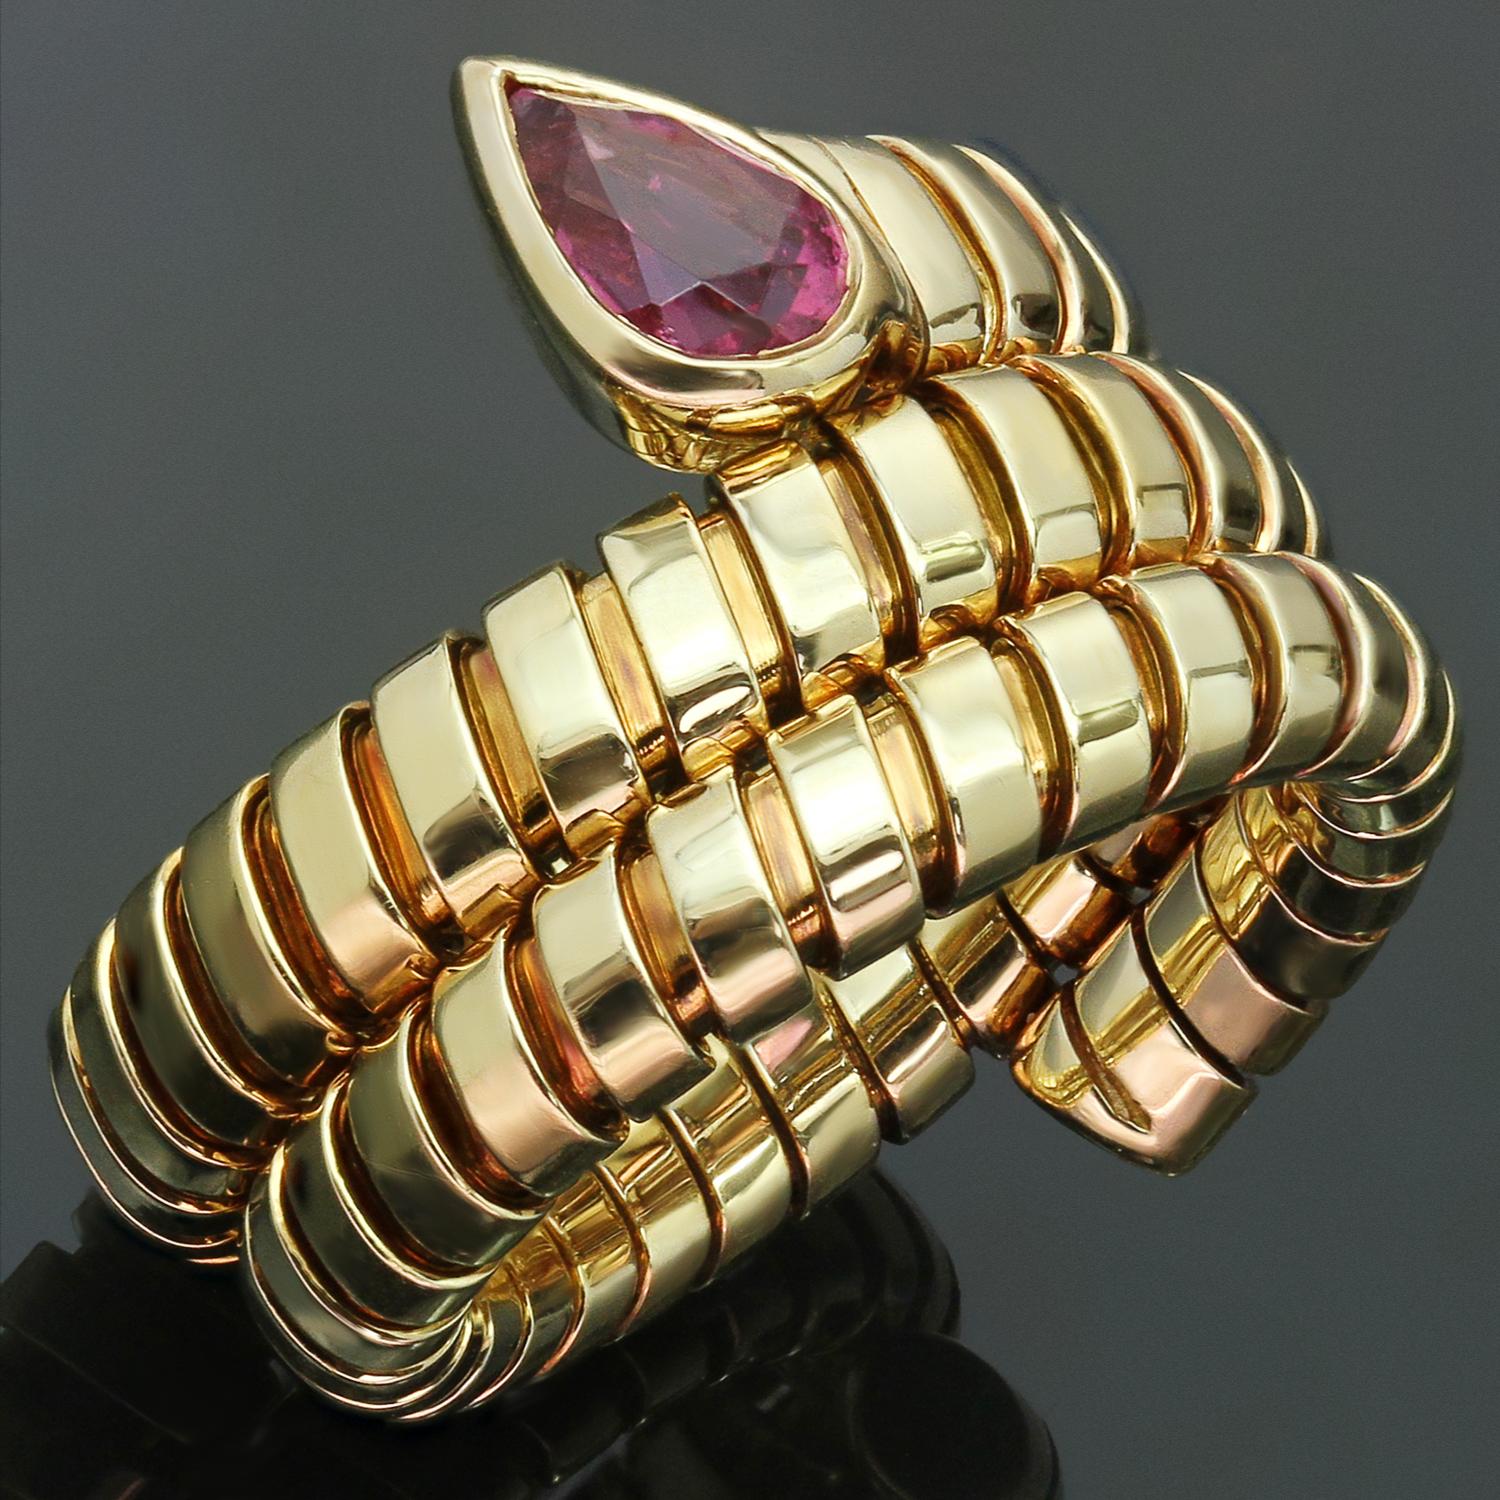 This fabulous Bulgari Serpenti 3-row ring from the iconic Tubogas collection is crafted in 18k yellow gold and set with a pear-cut pink tourmaline. The flex wrap allows the ring size to be slightly adjustable. Made in Italy circa 1990s.